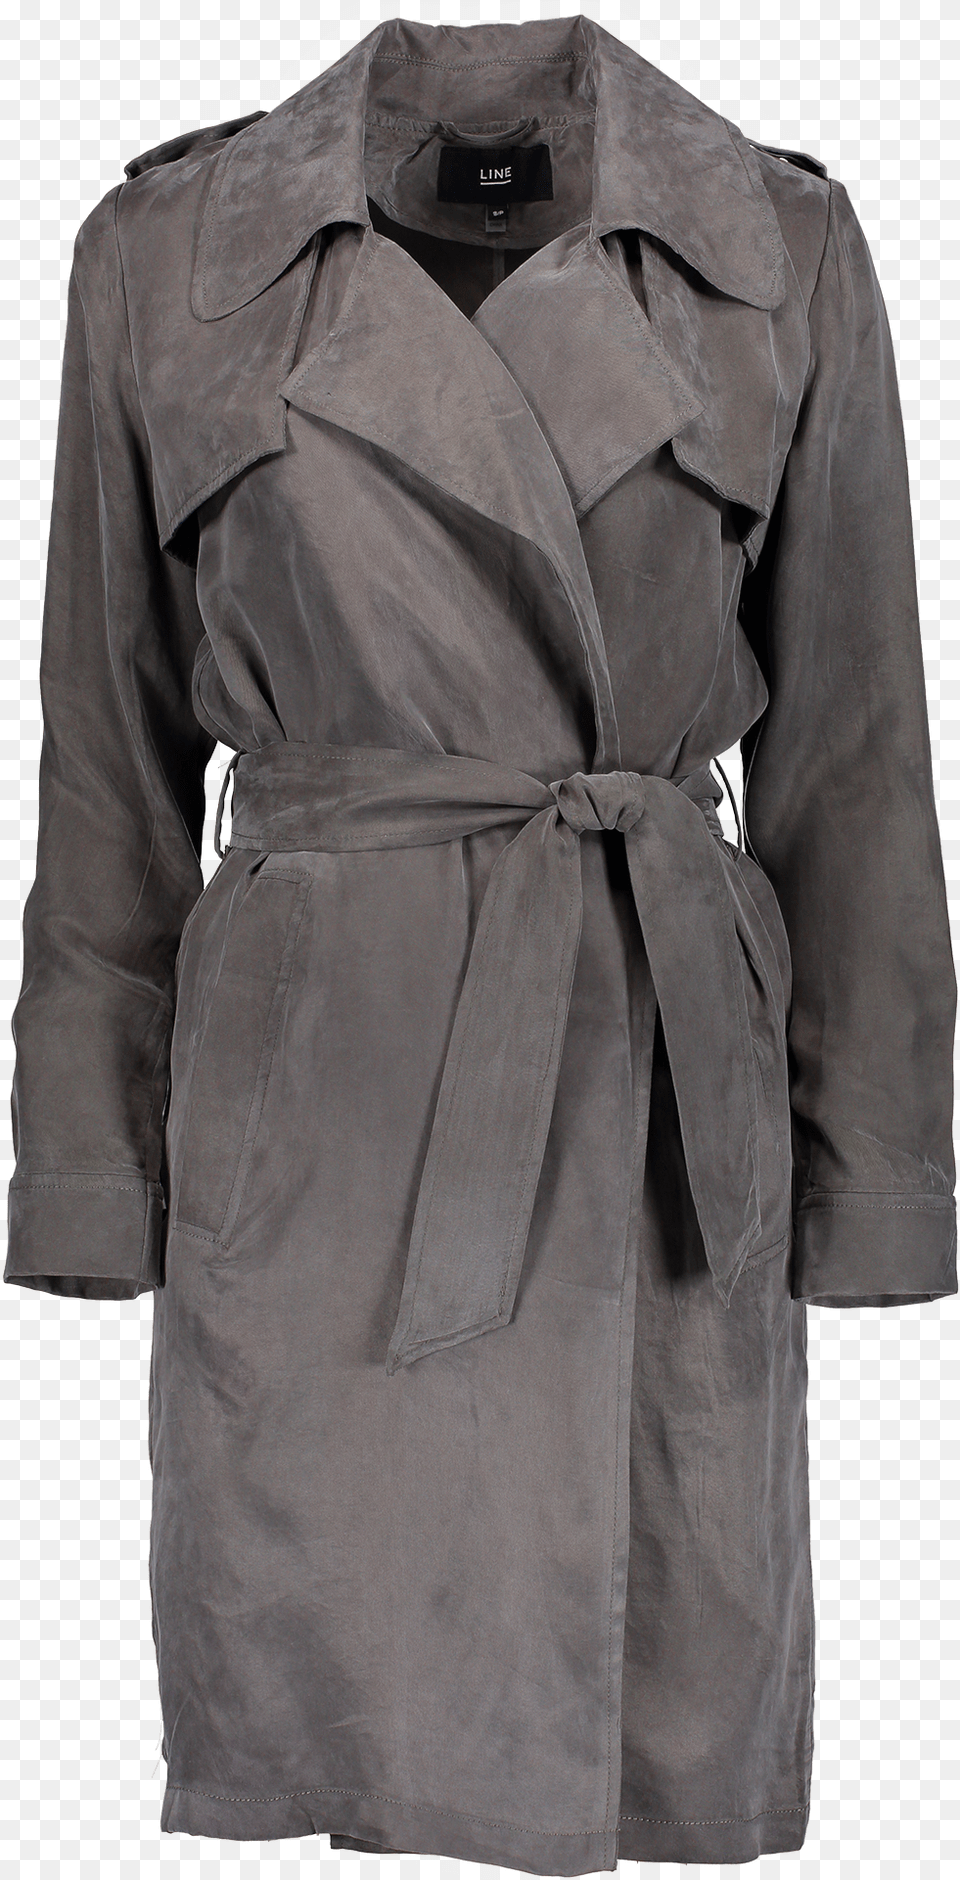 Trench Coat Download Trench Coat, Clothing, Overcoat, Trench Coat Free Transparent Png